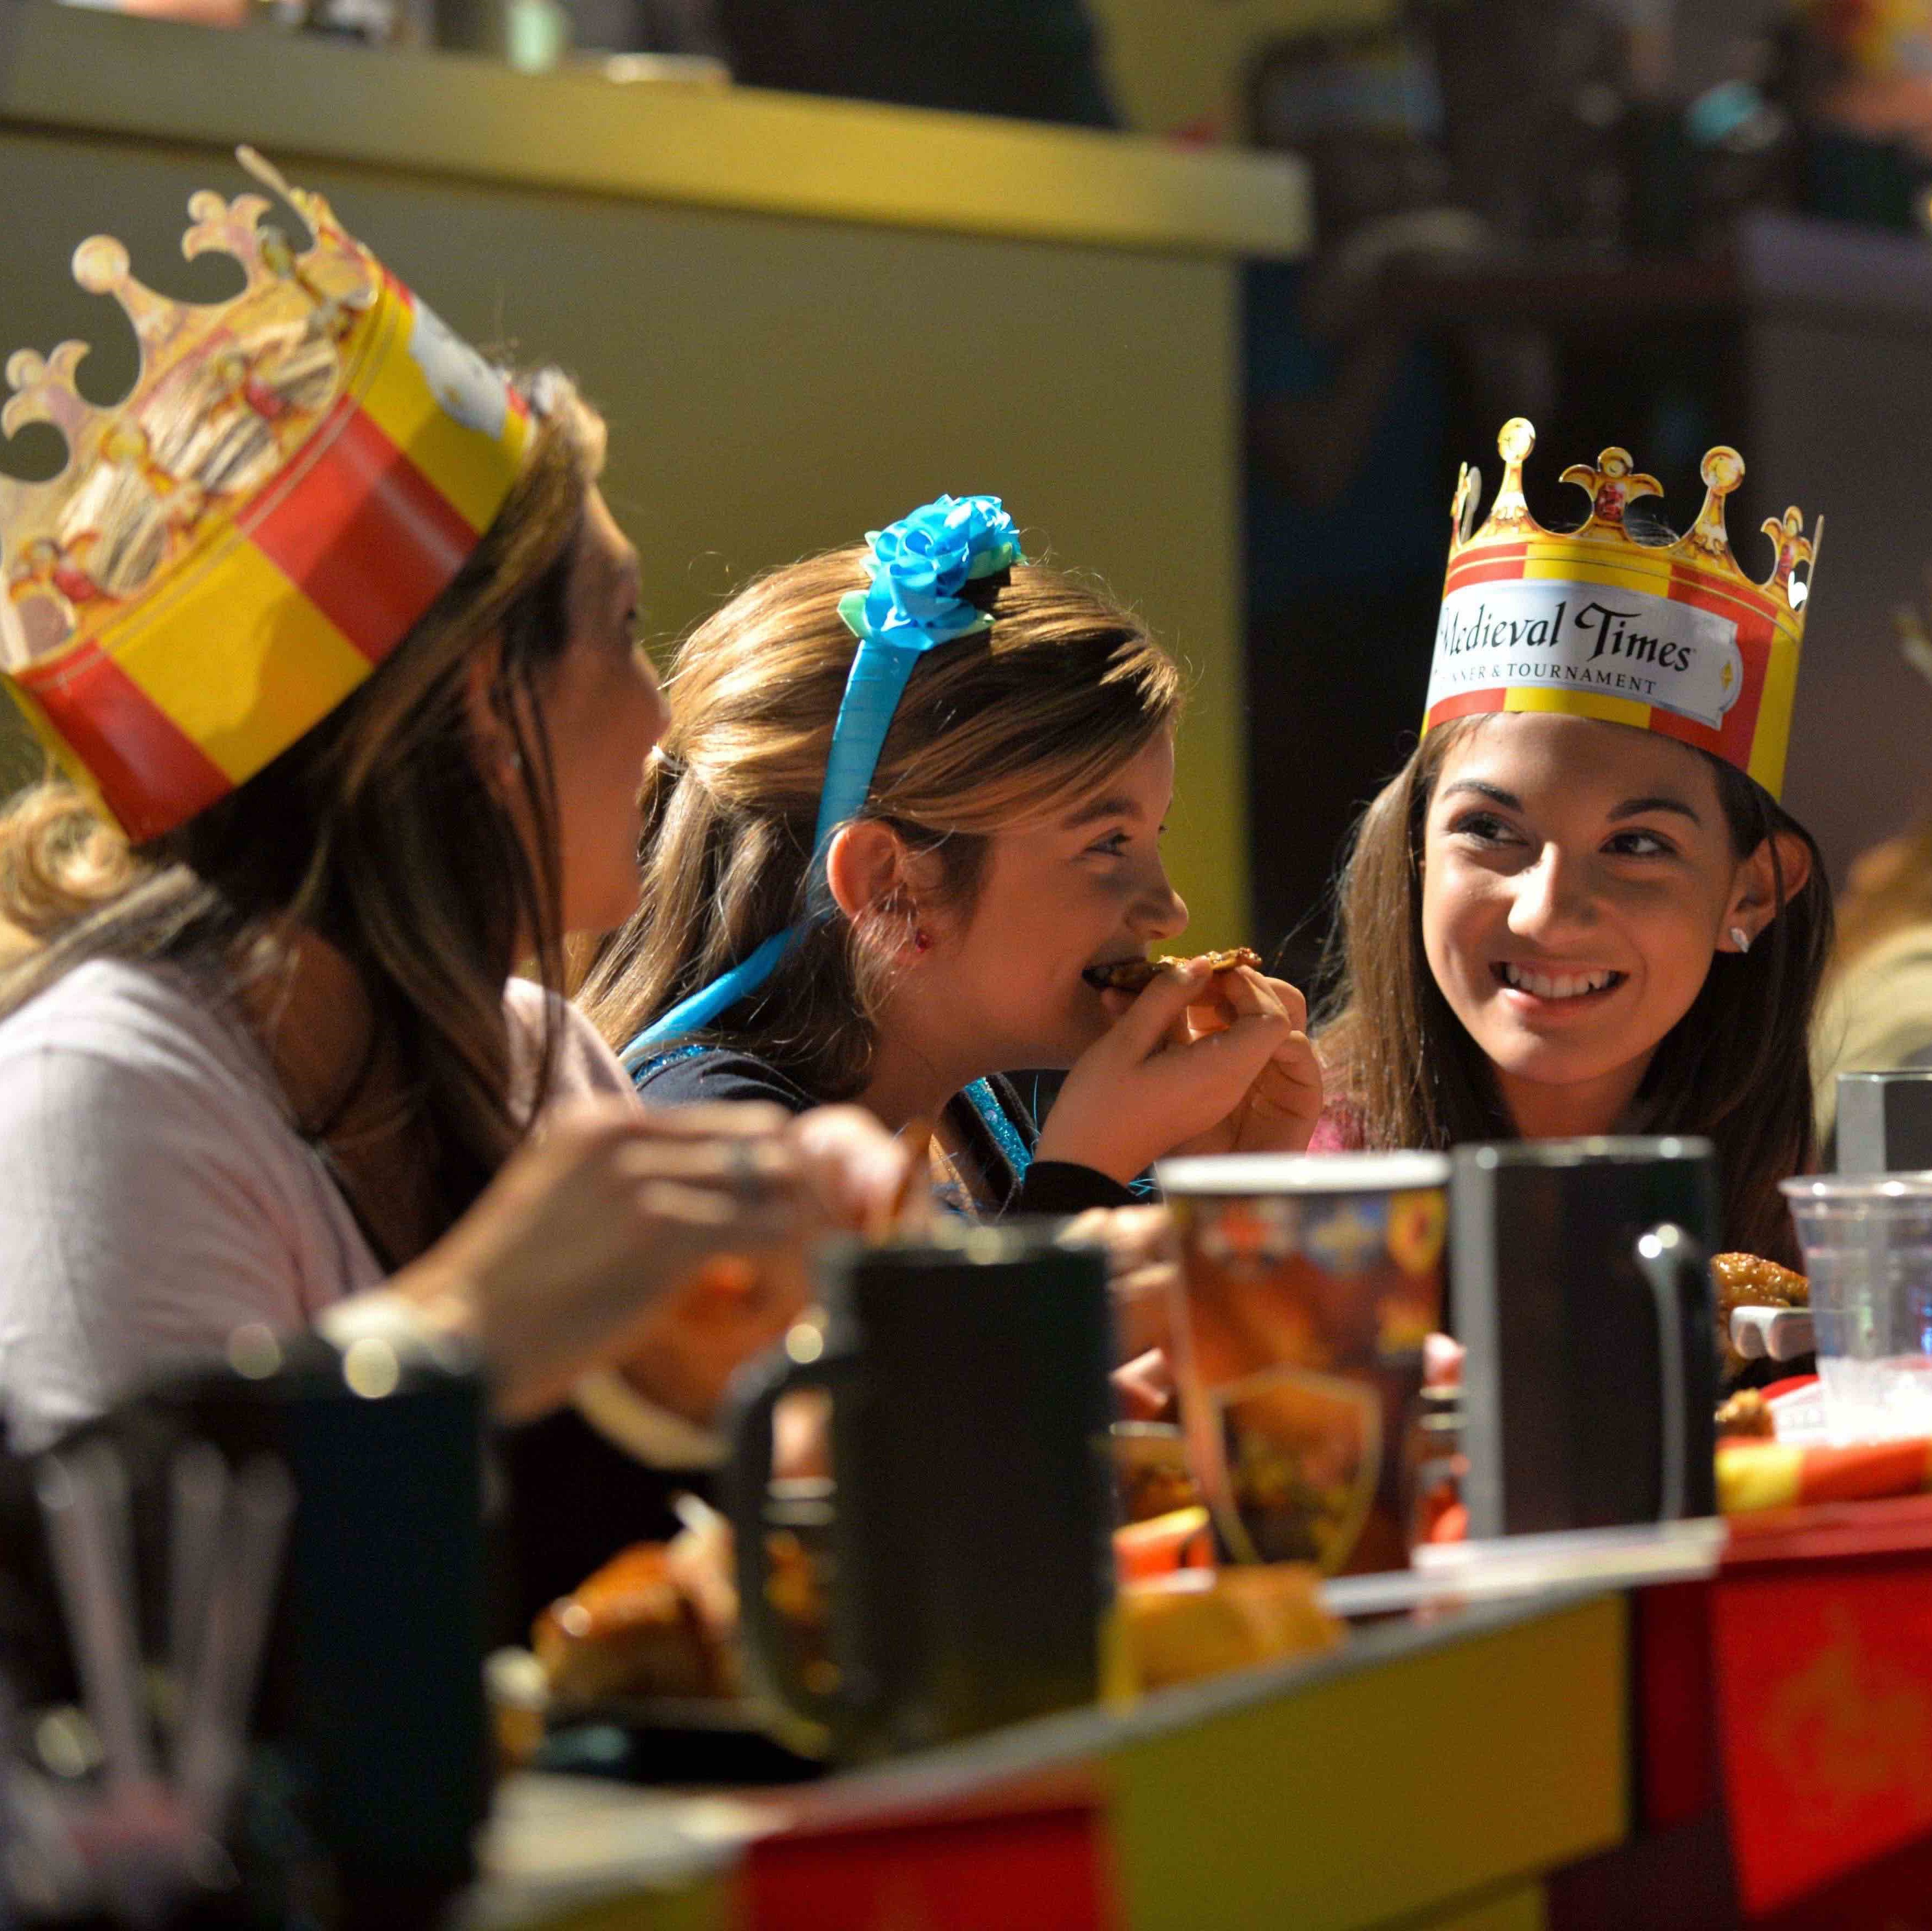 Three young girls smiling at each other in the arena tables wearing crowns 